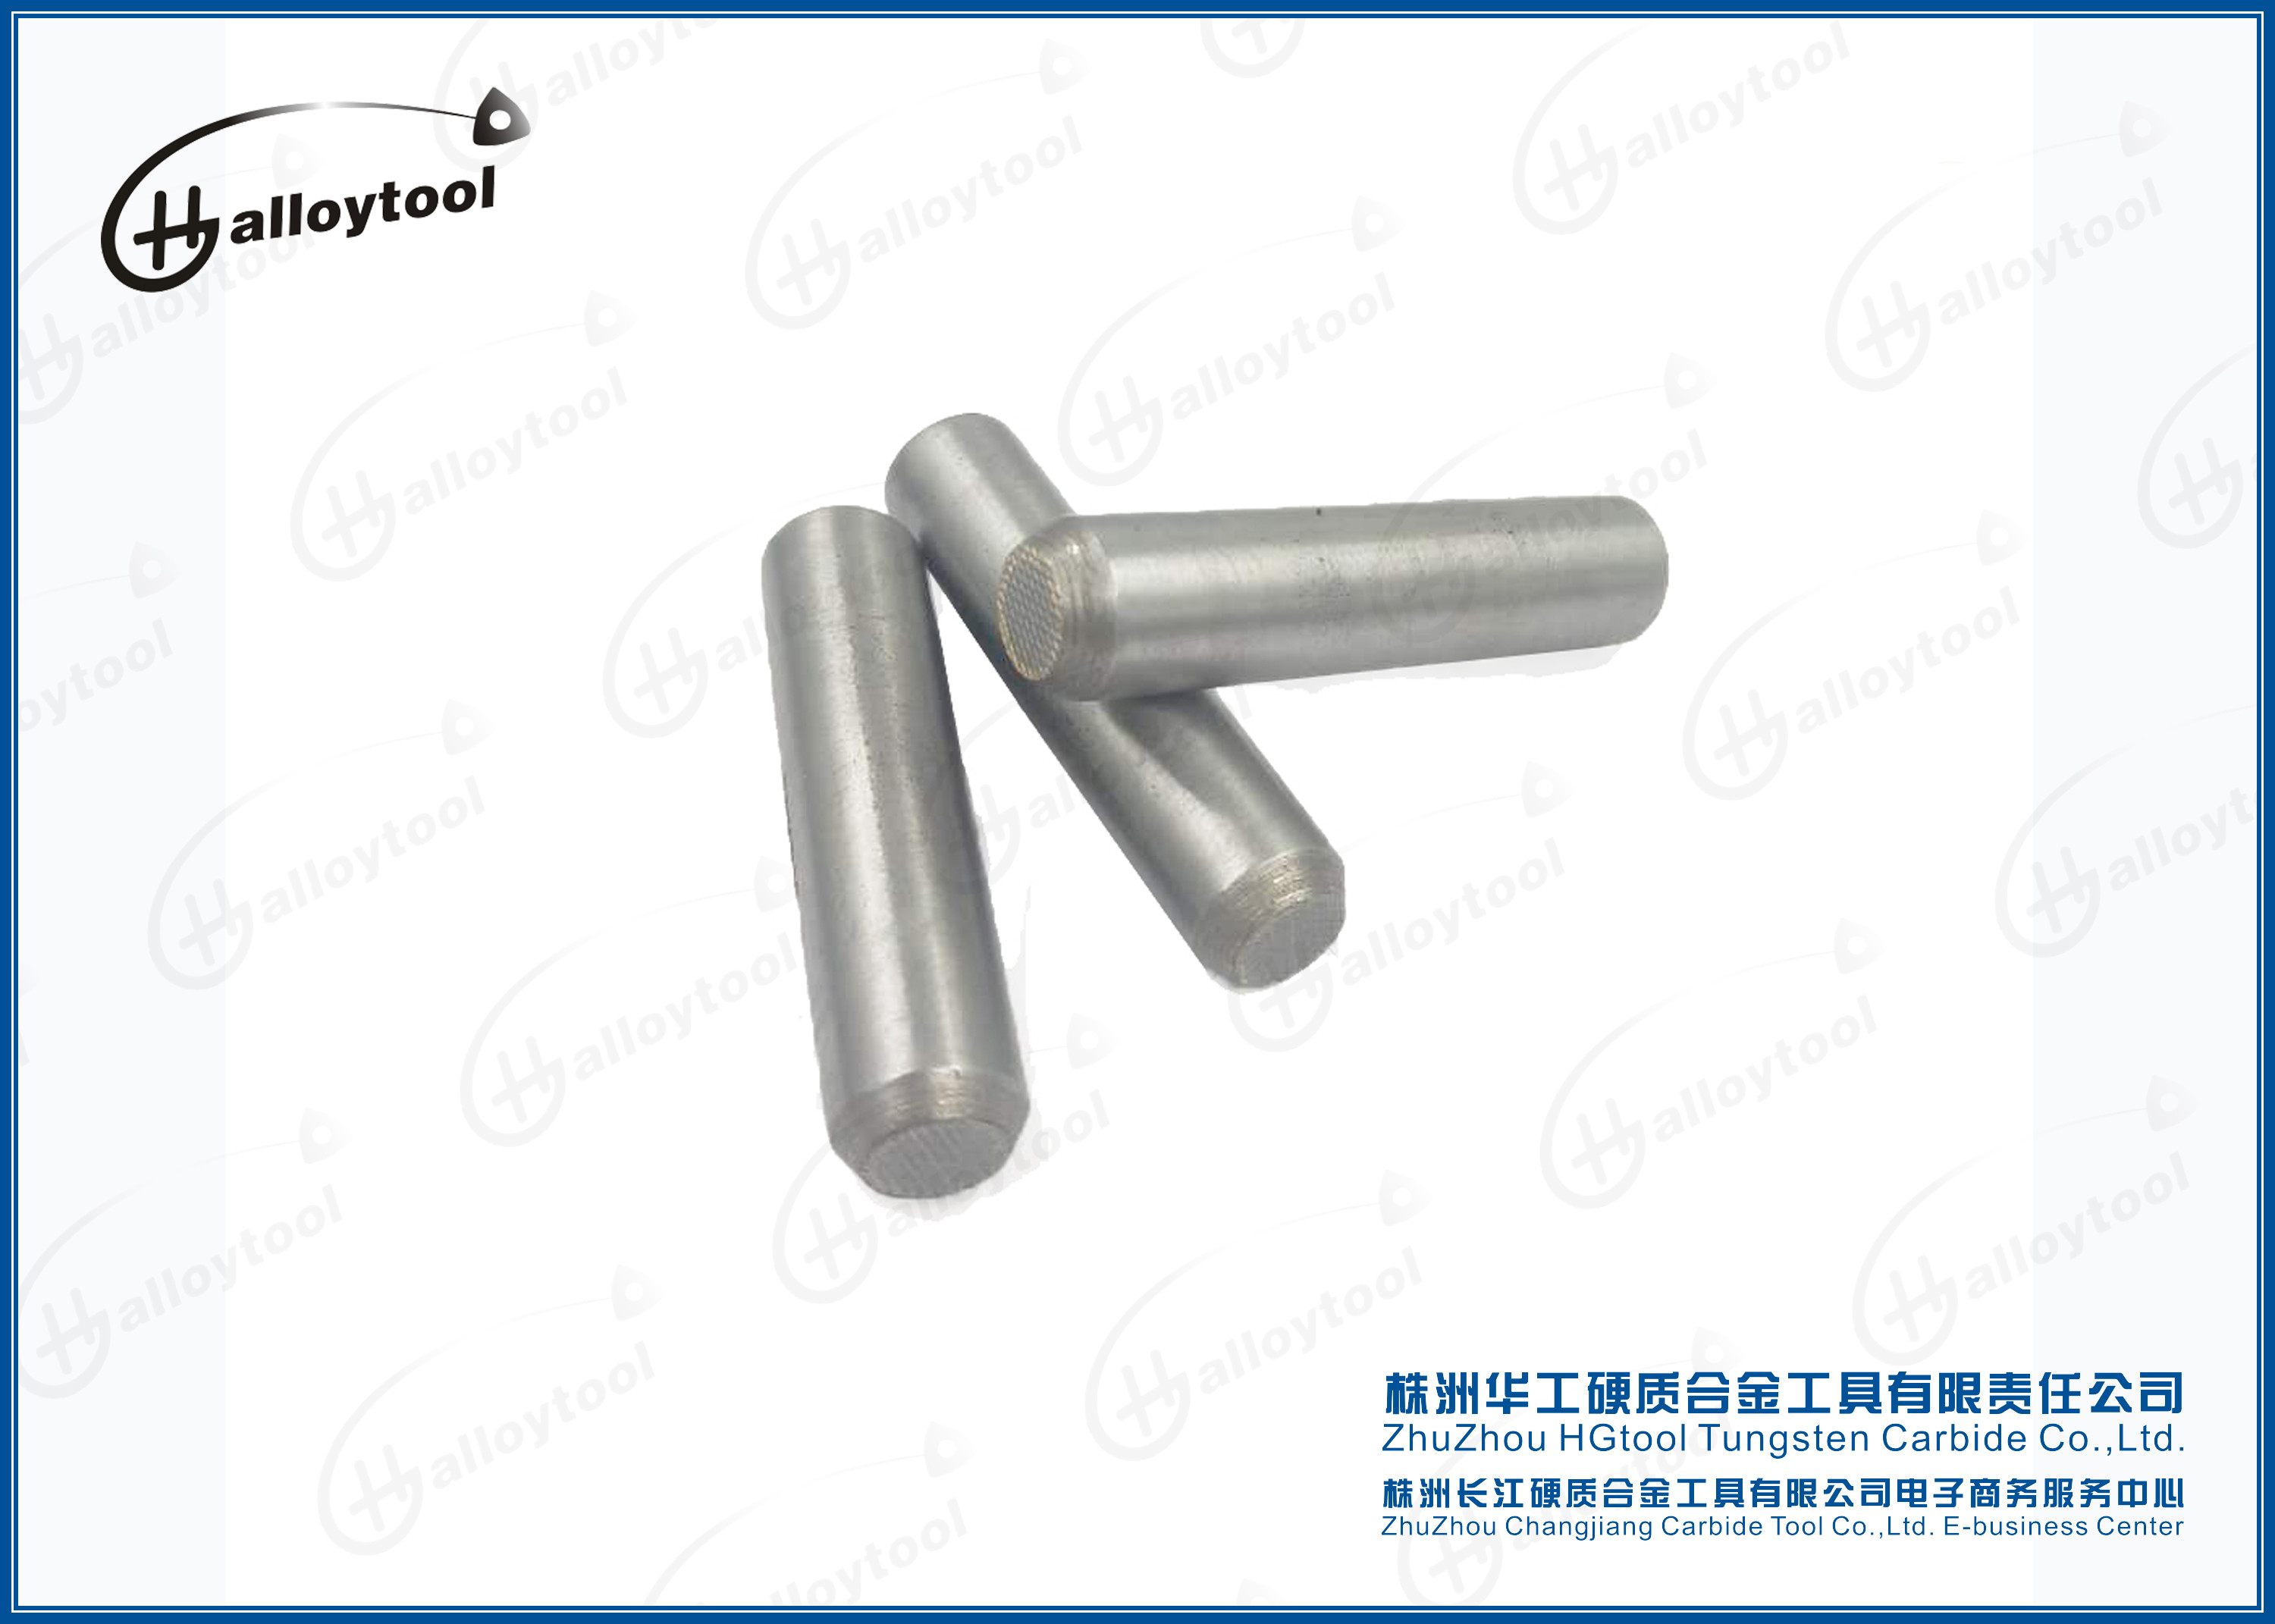 Cemented Tungsten Carbide Dies For Making Nails HRA89-HRA92.9 Hardness